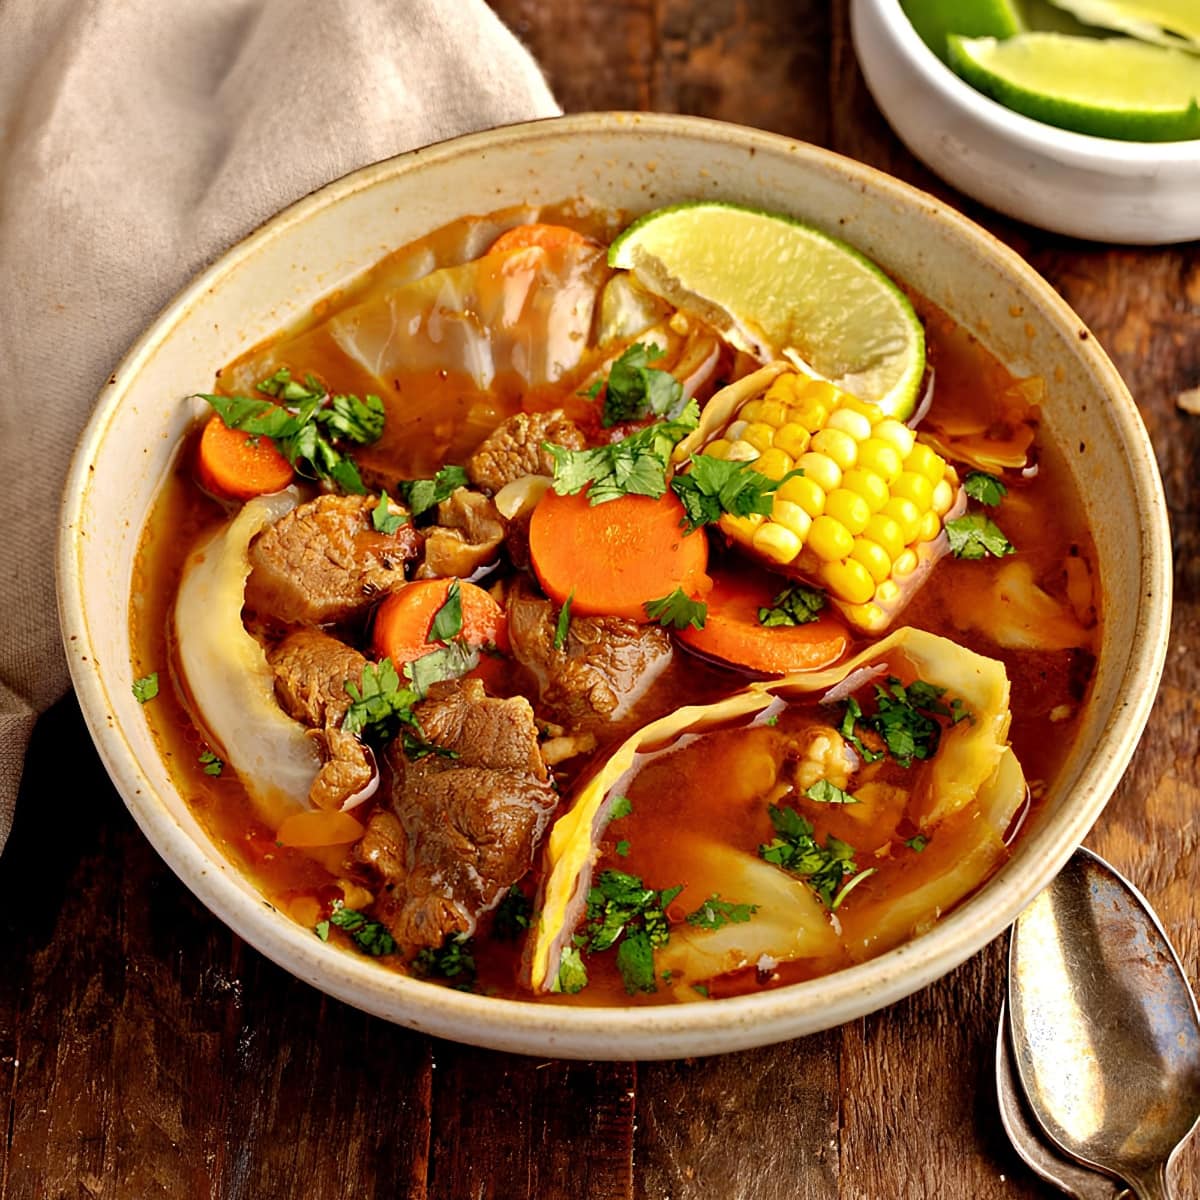 A hearty bowl of soup filled with tender meat, sweet corn, and a medley of colorful vegetables